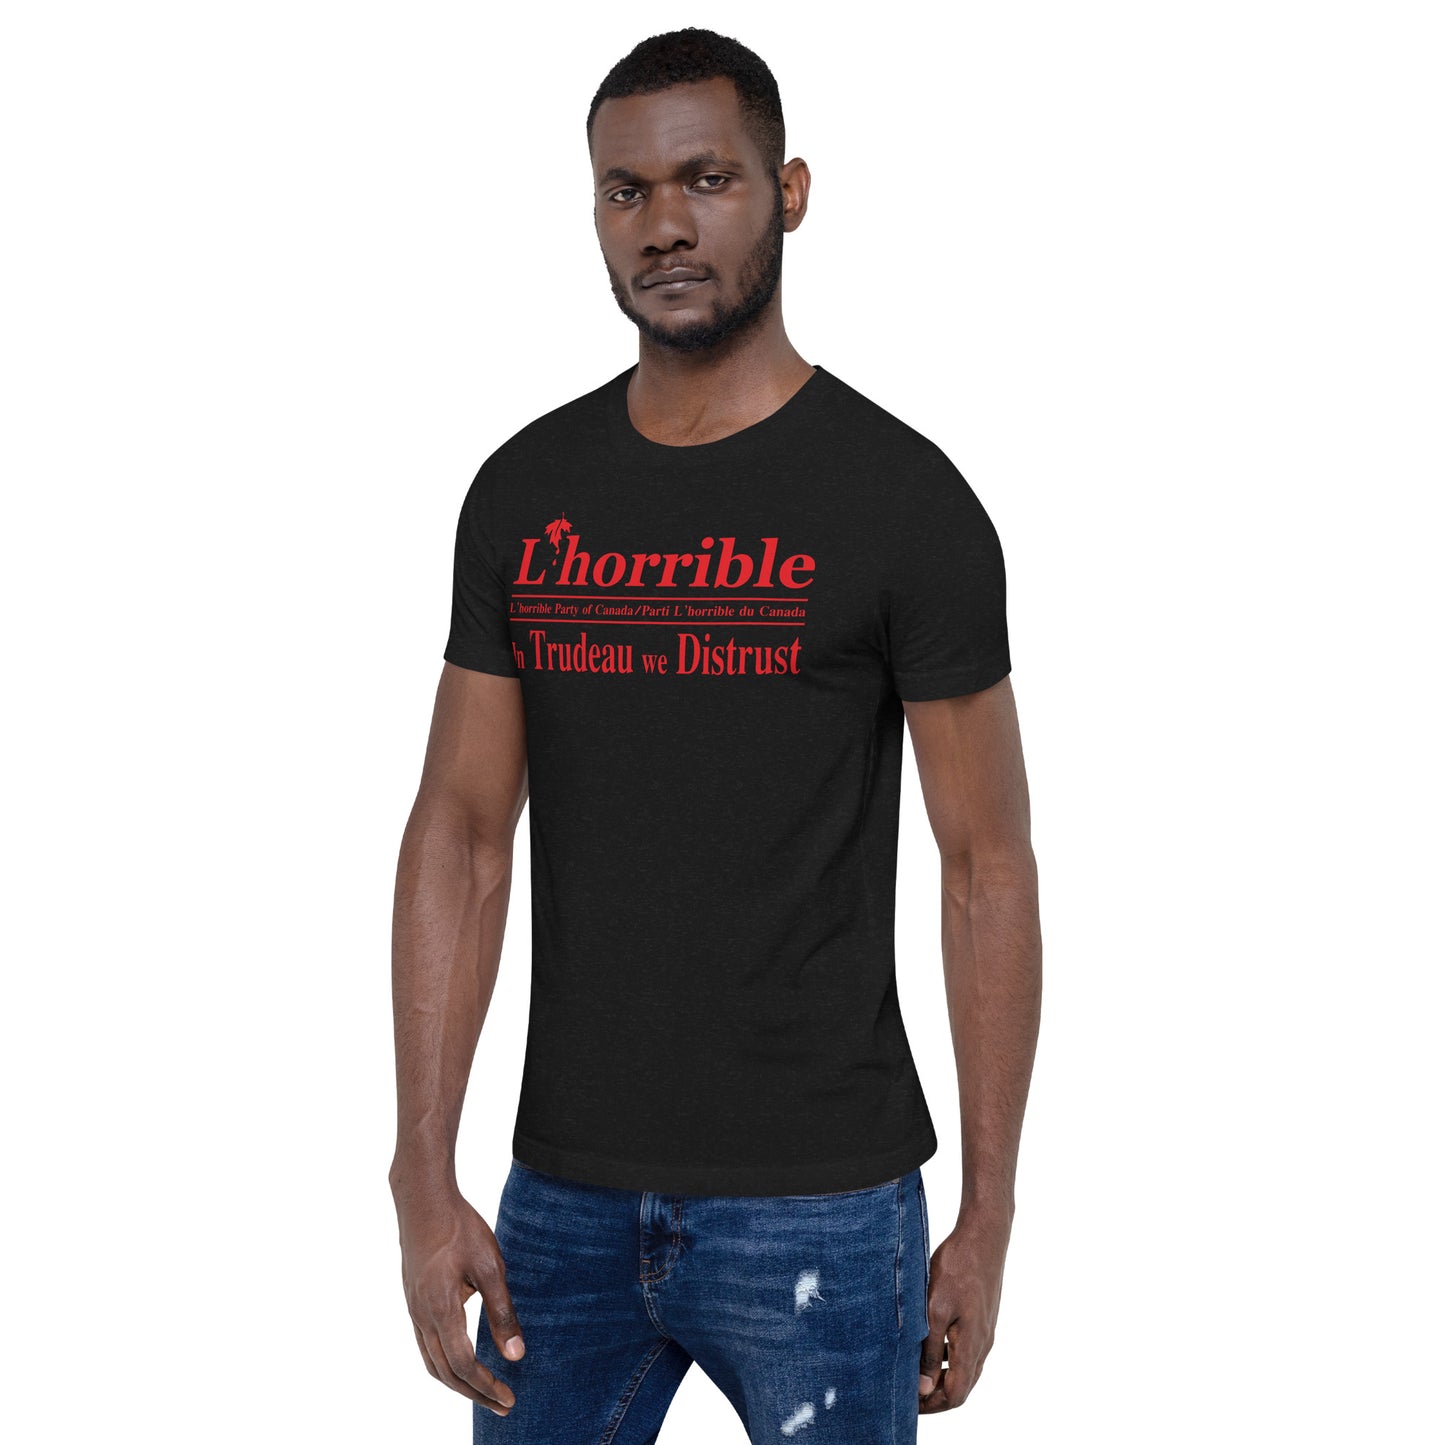 L'Horrible Party of Canada - Unisex Tee